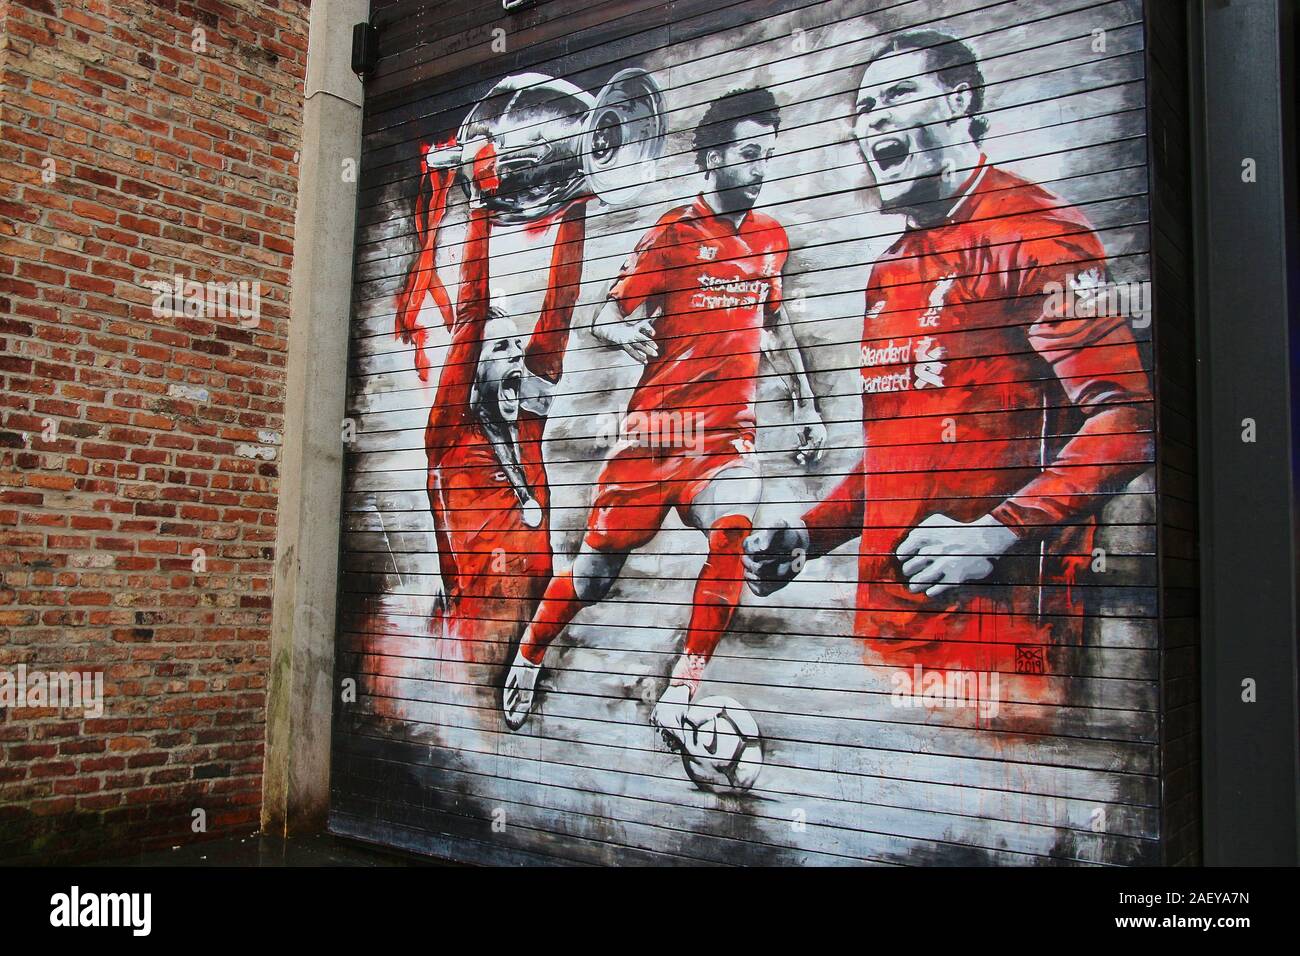 Garage door painting of FC Liverpool football players on Fleet Street, in  Concert Square, Cavern Quarter, Liverpool. England, Europe Stock Photo -  Alamy